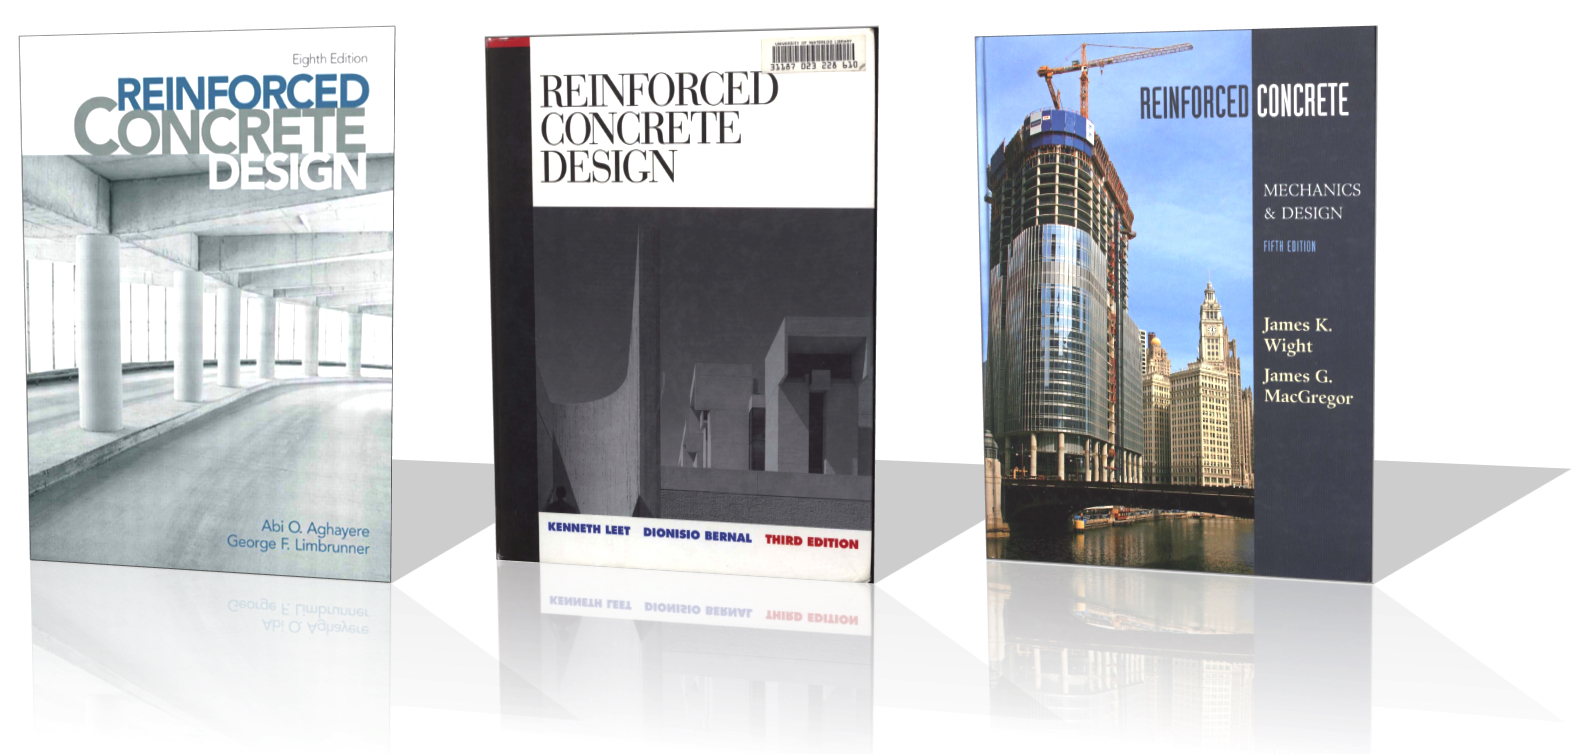 reinforced concrete design 8th edition abi o aghayere solution manual